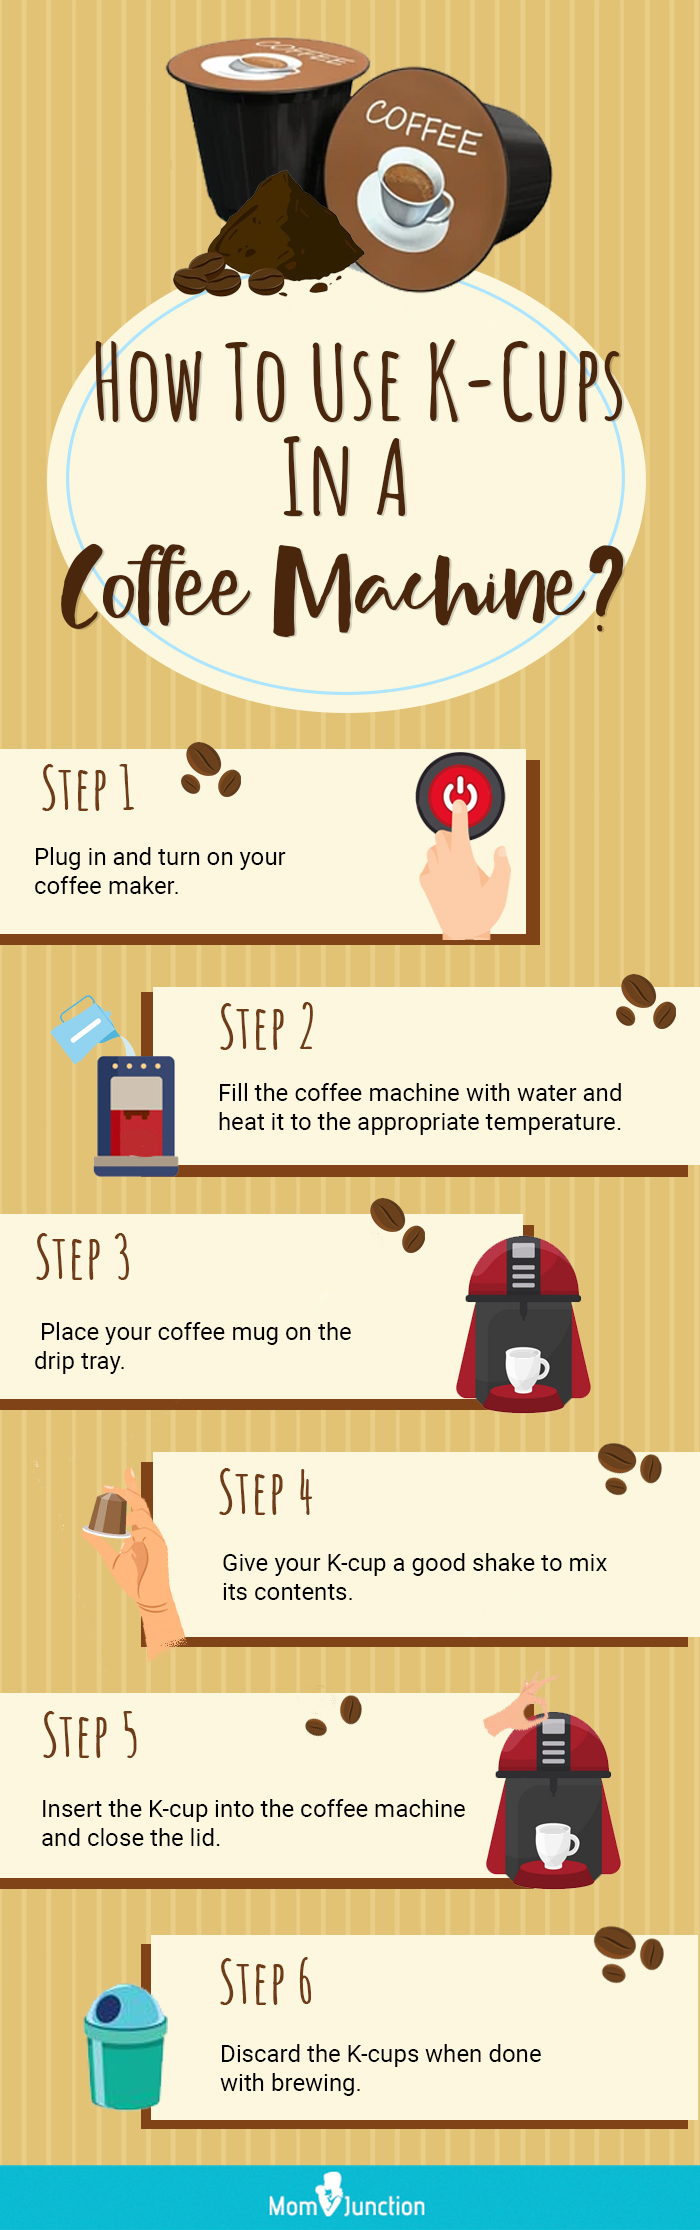 How To Use K-Cups In A Coffee Machine